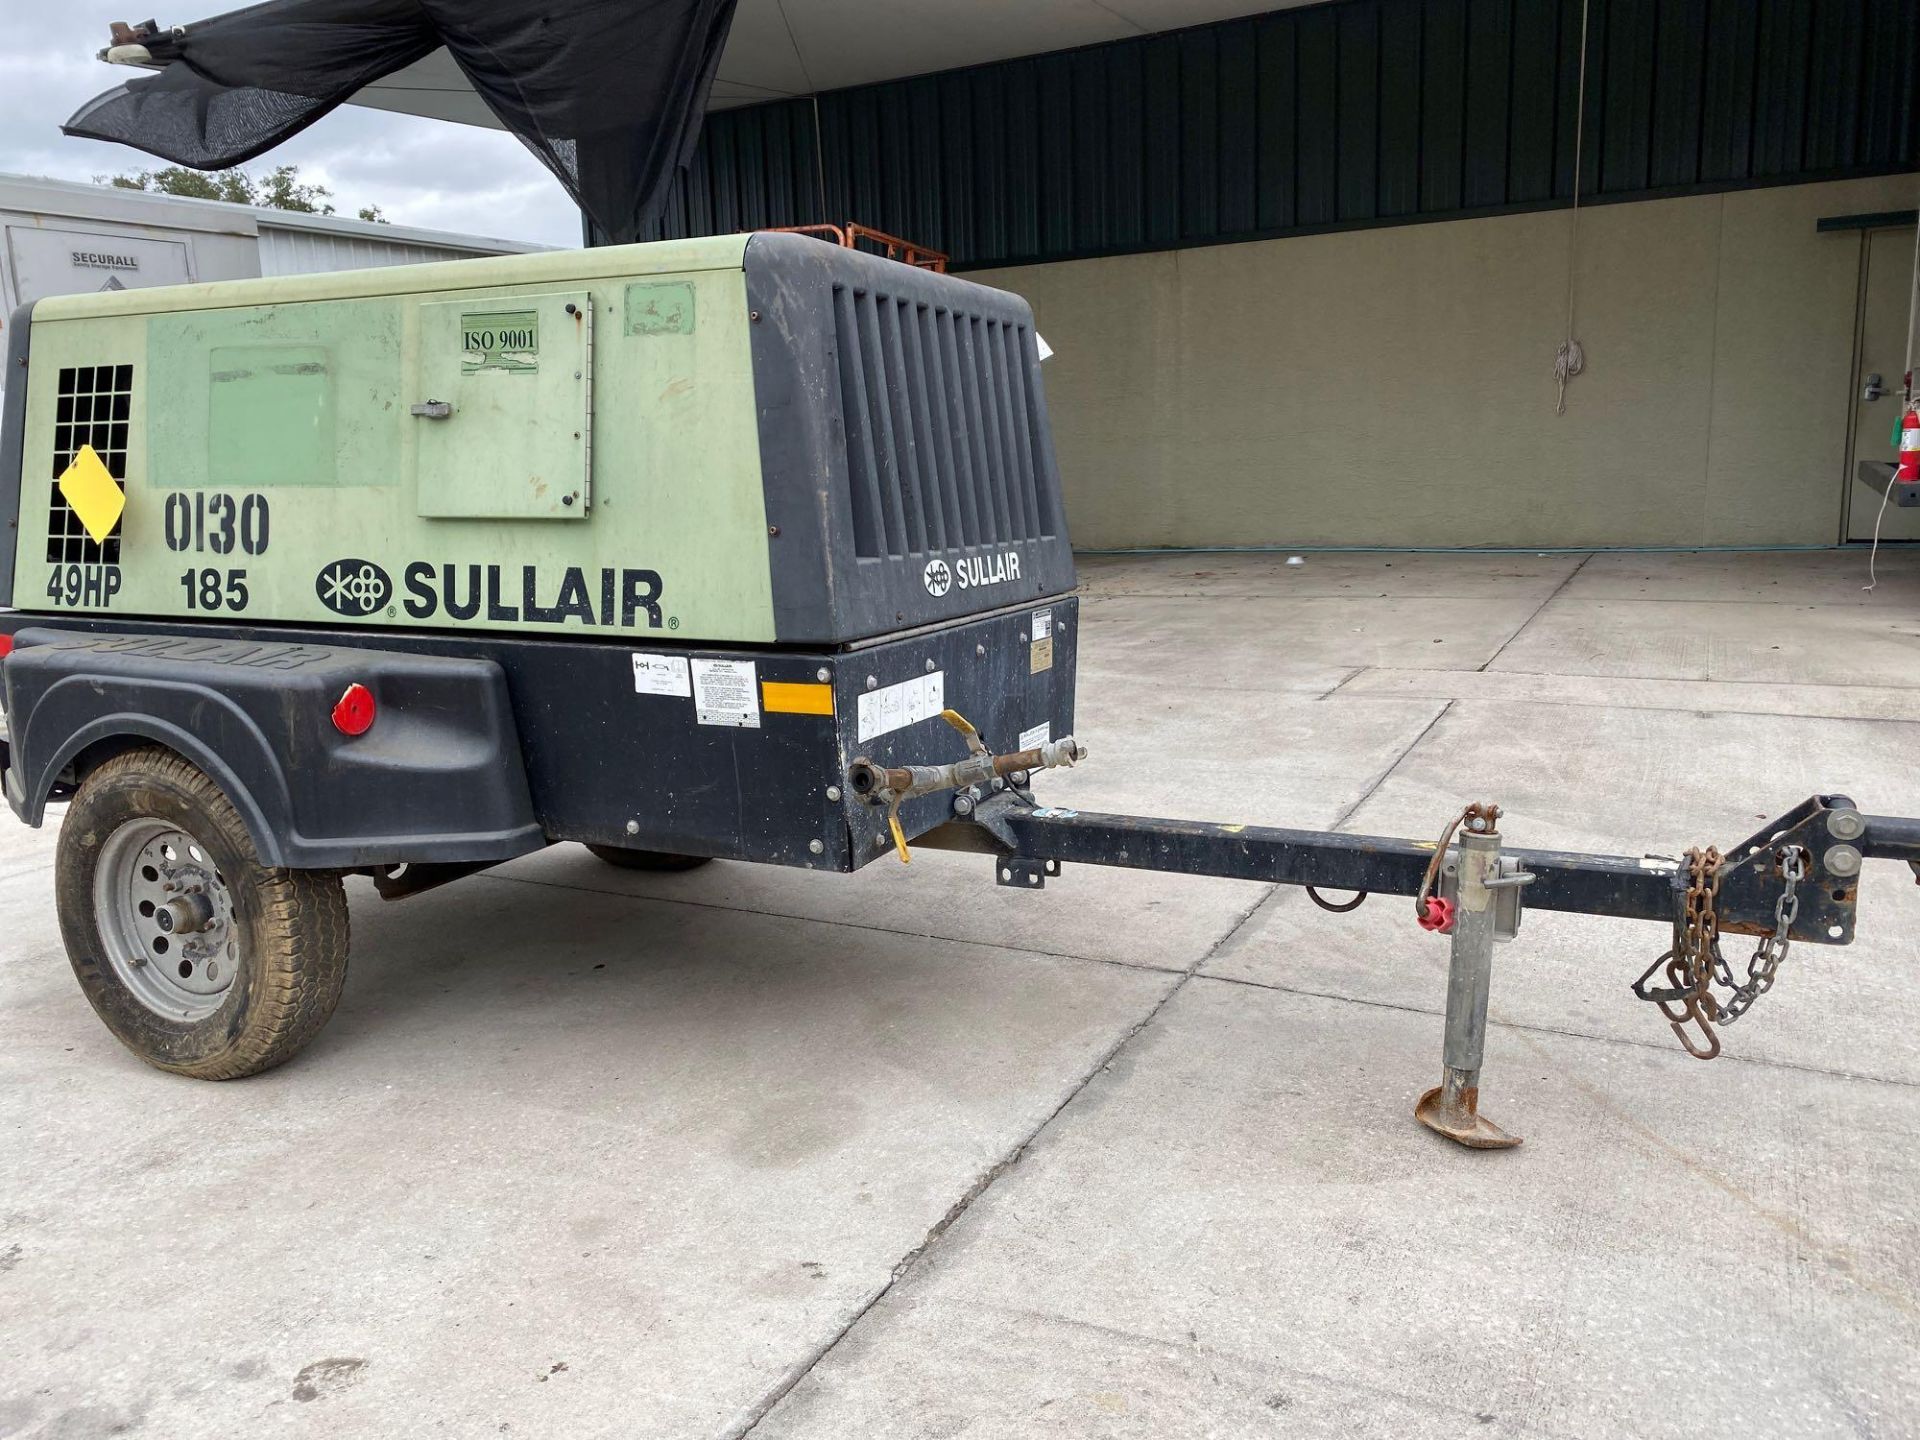 SULLAIR 185 TRAILER MOUNTED AIR COMPRESSOR, TURNS OVER, WOULDN'T START, 49 HP